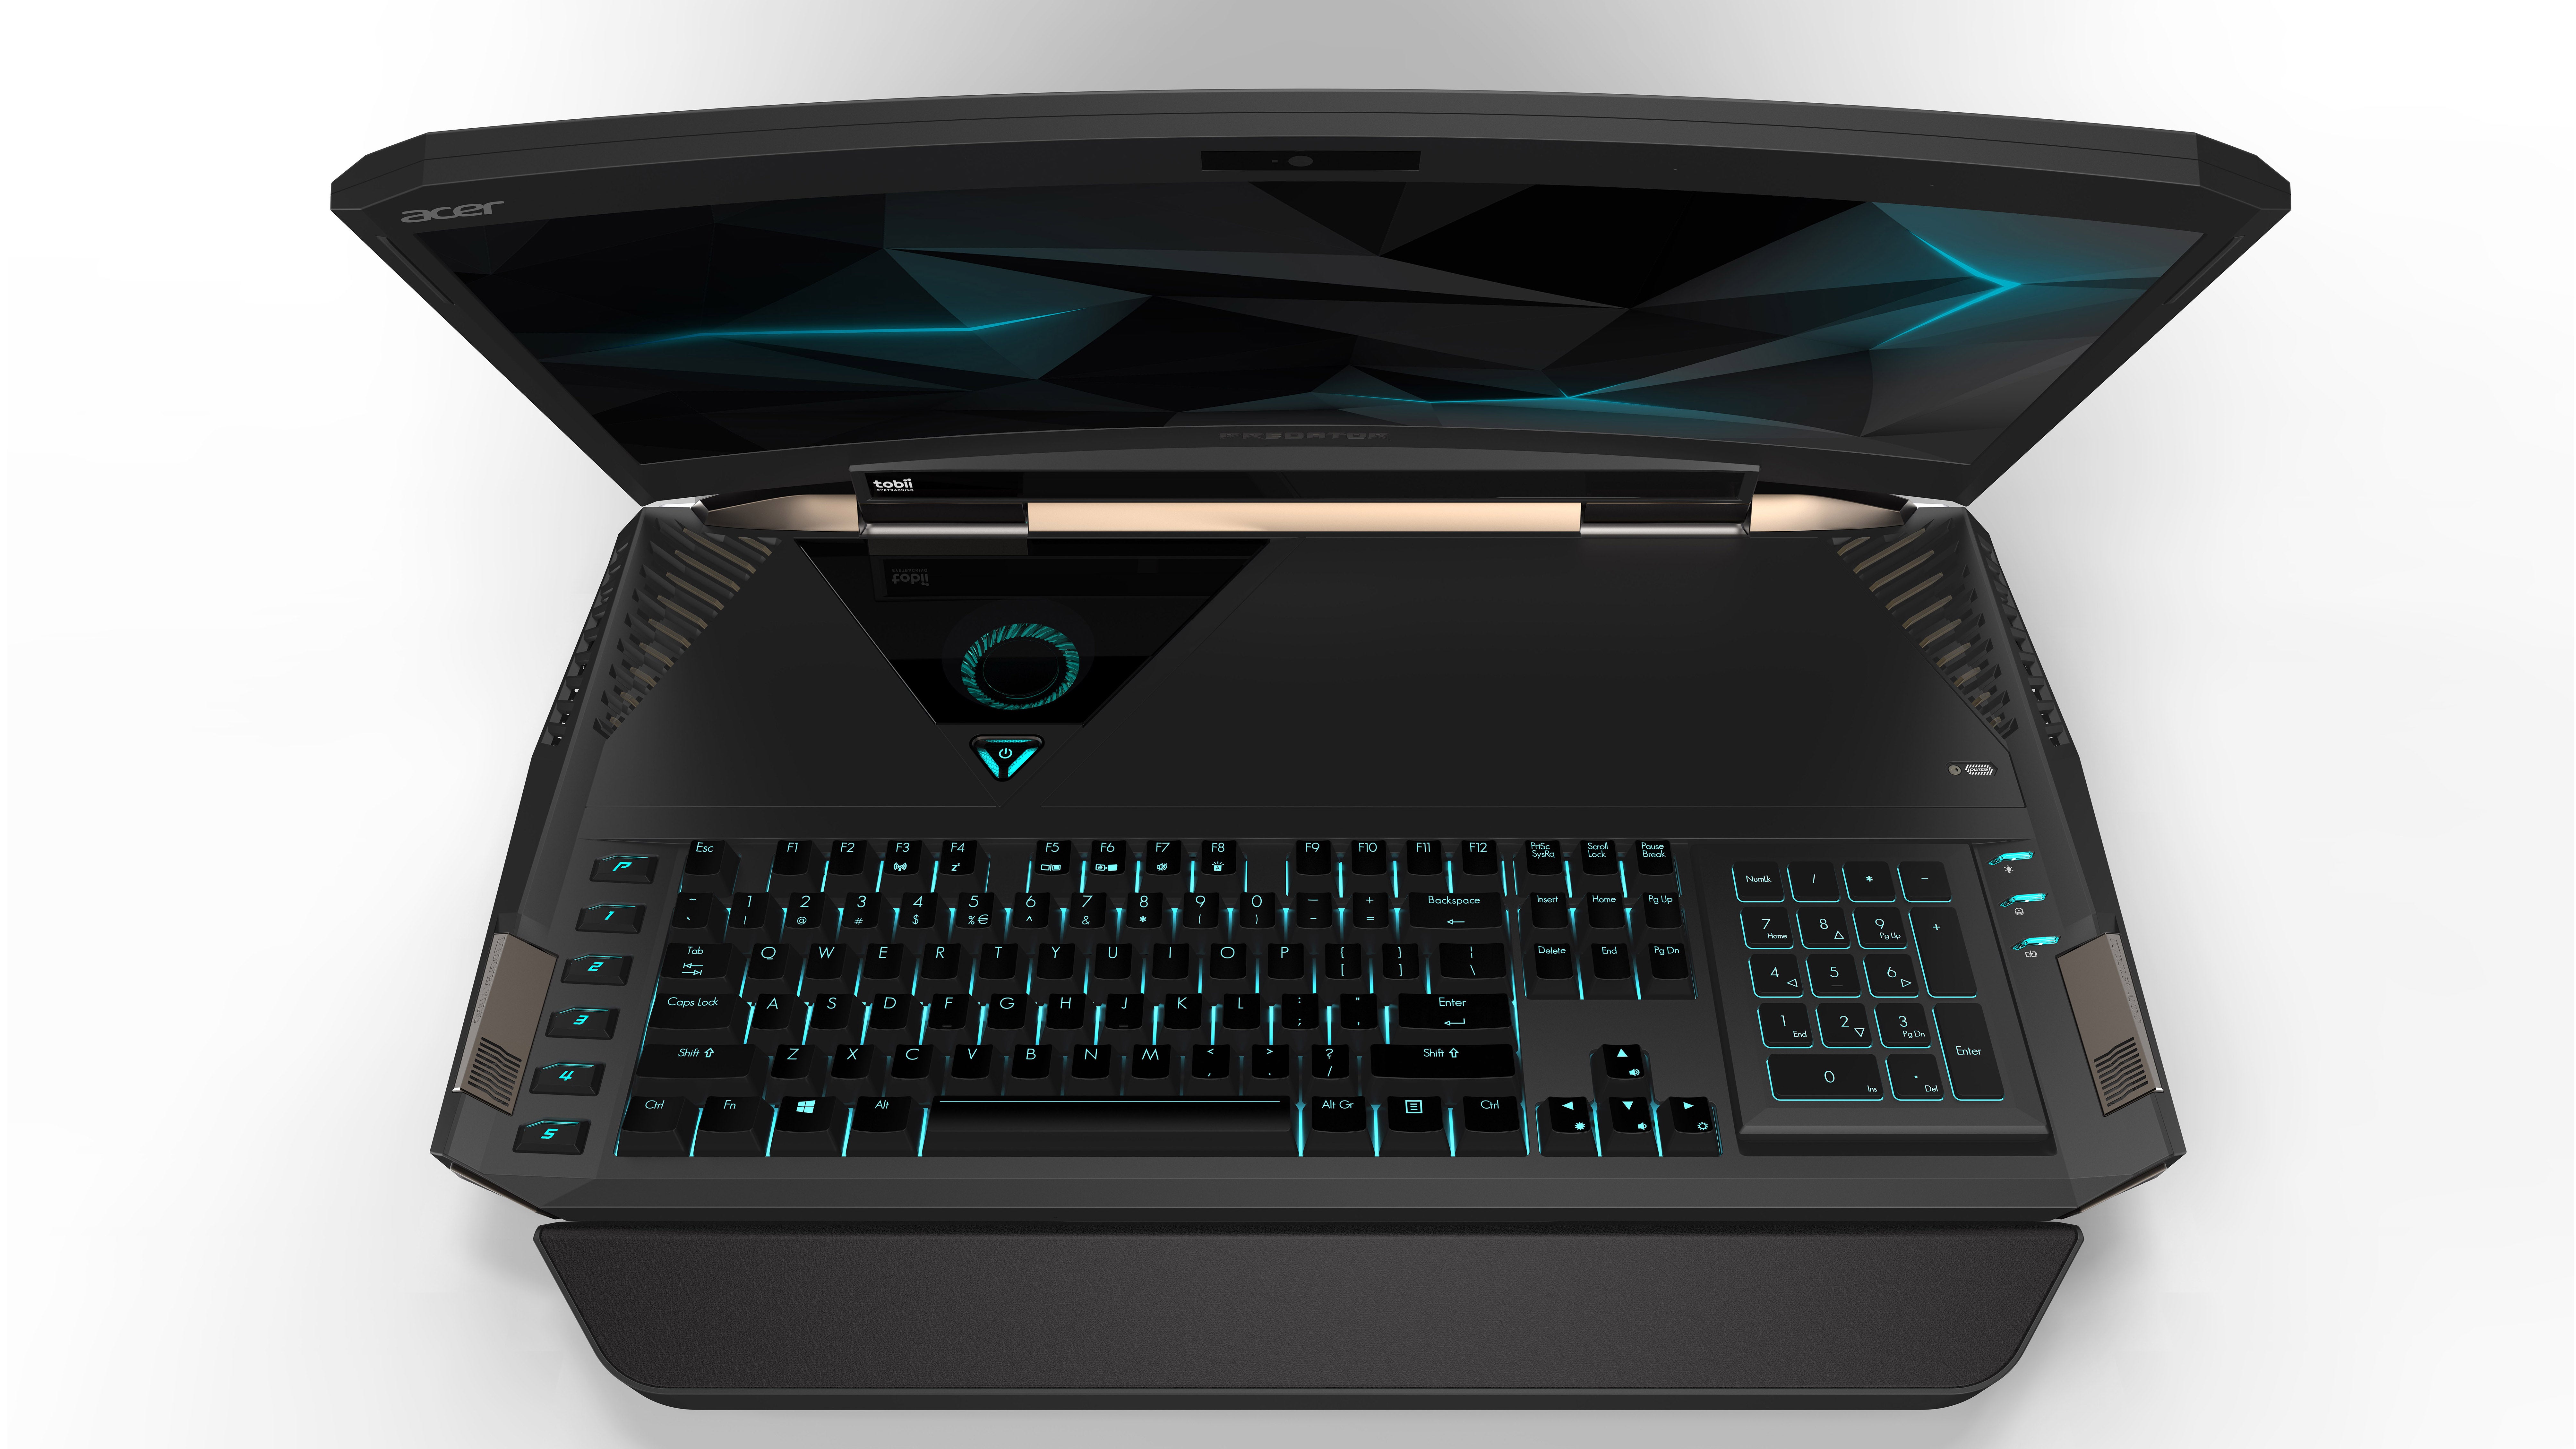 This 21Inch Gaming Laptop With a Curved Display Is Too Absurd for This